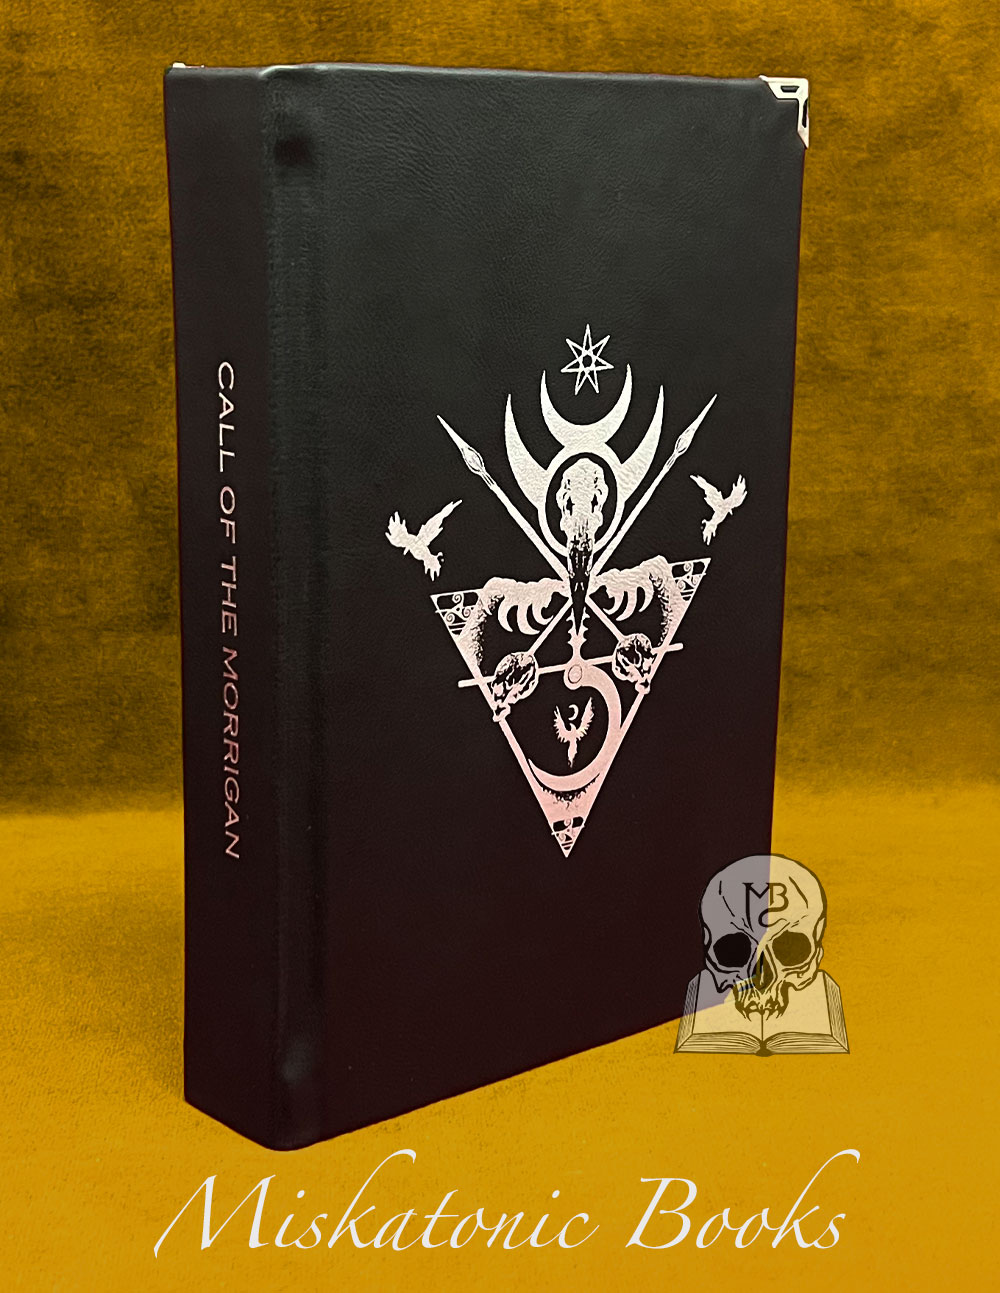 CALL OF THE MORRIGAN : Celts Beneath the Shroud by Dan Talon Rucker - DELUXE Leather Bound Limited Edition Hardcover with Altar Cloth